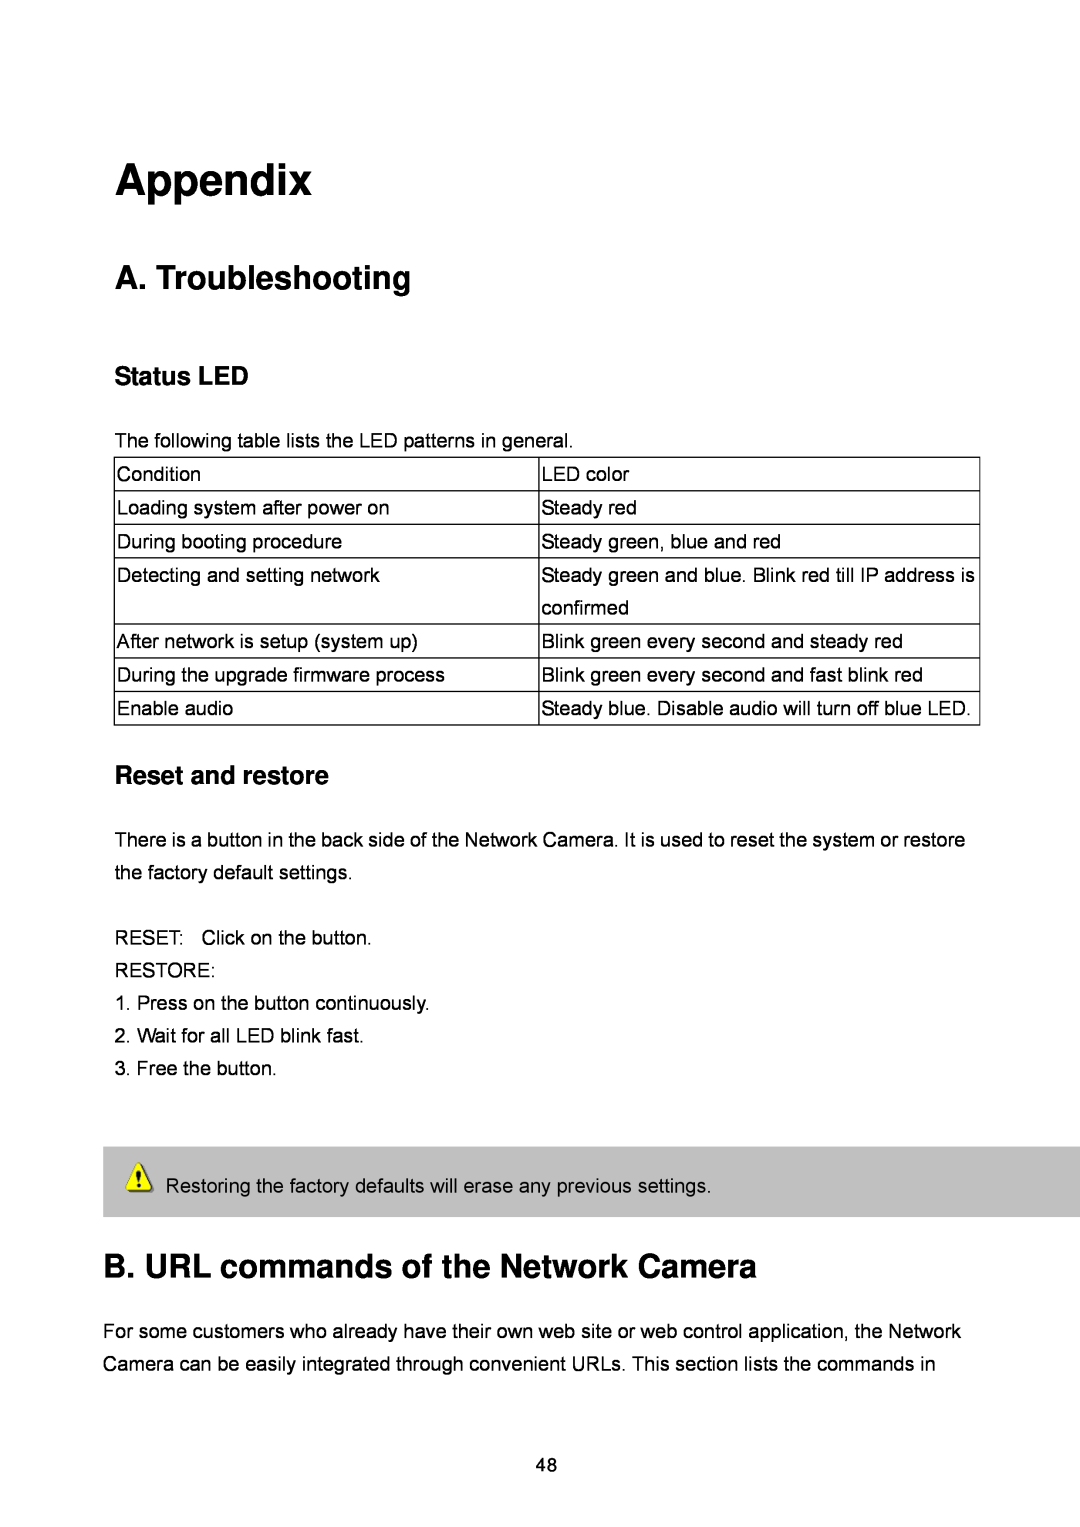 LevelOne FCS-1060 Appendix, A. Troubleshooting, B. URL commands of the Network Camera, Status LED, Reset and restore 